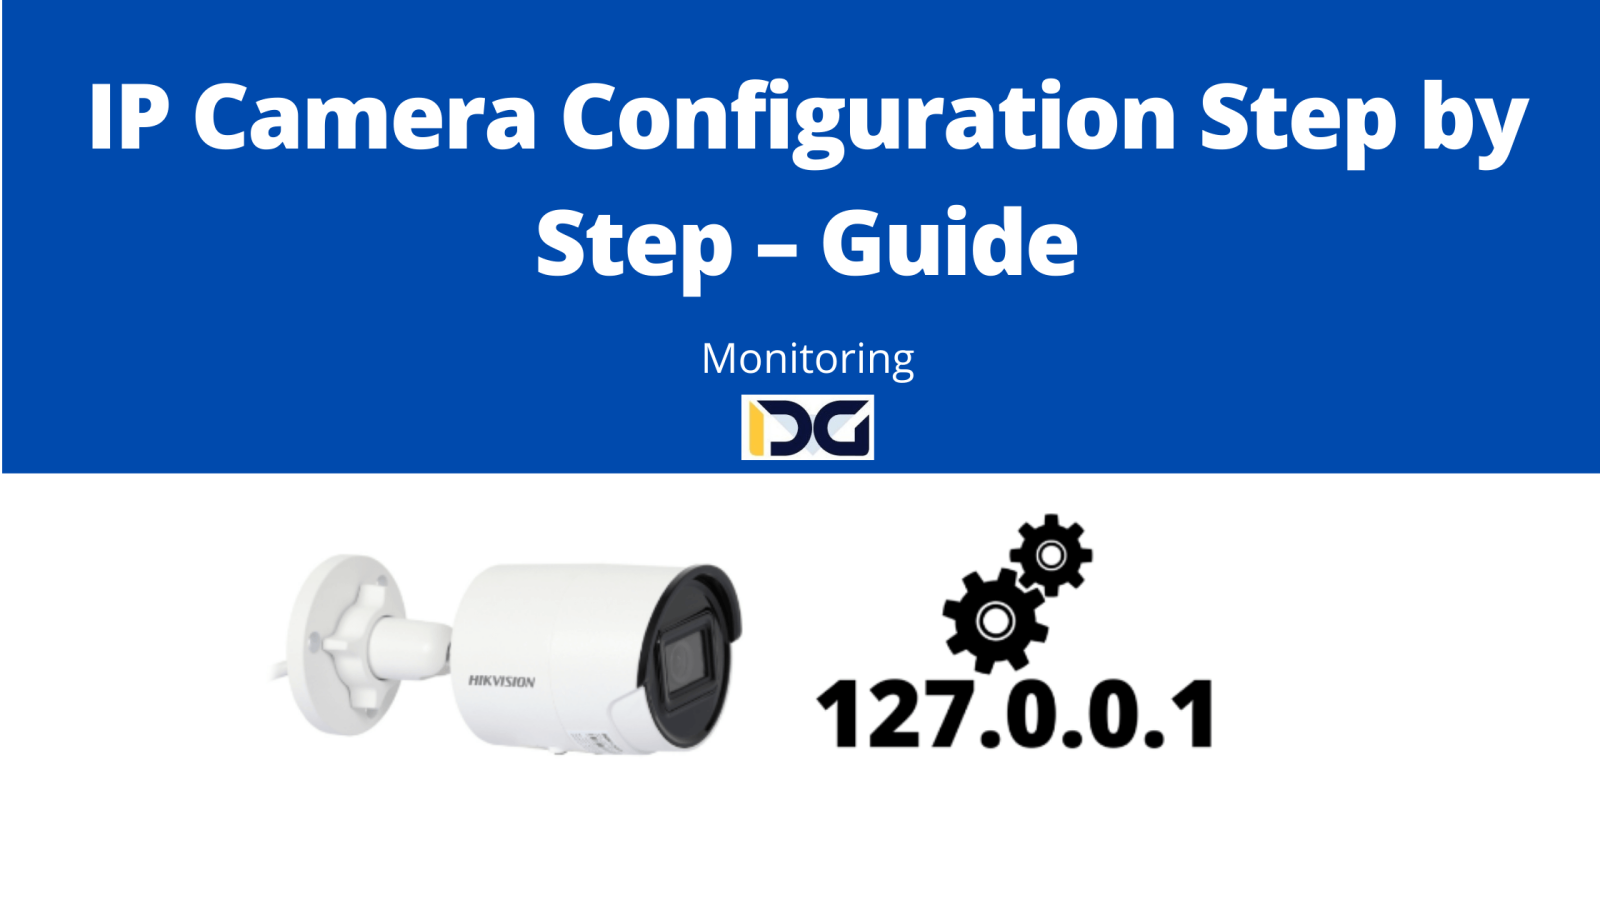 IP Camera Configuration Step by Step - Guide